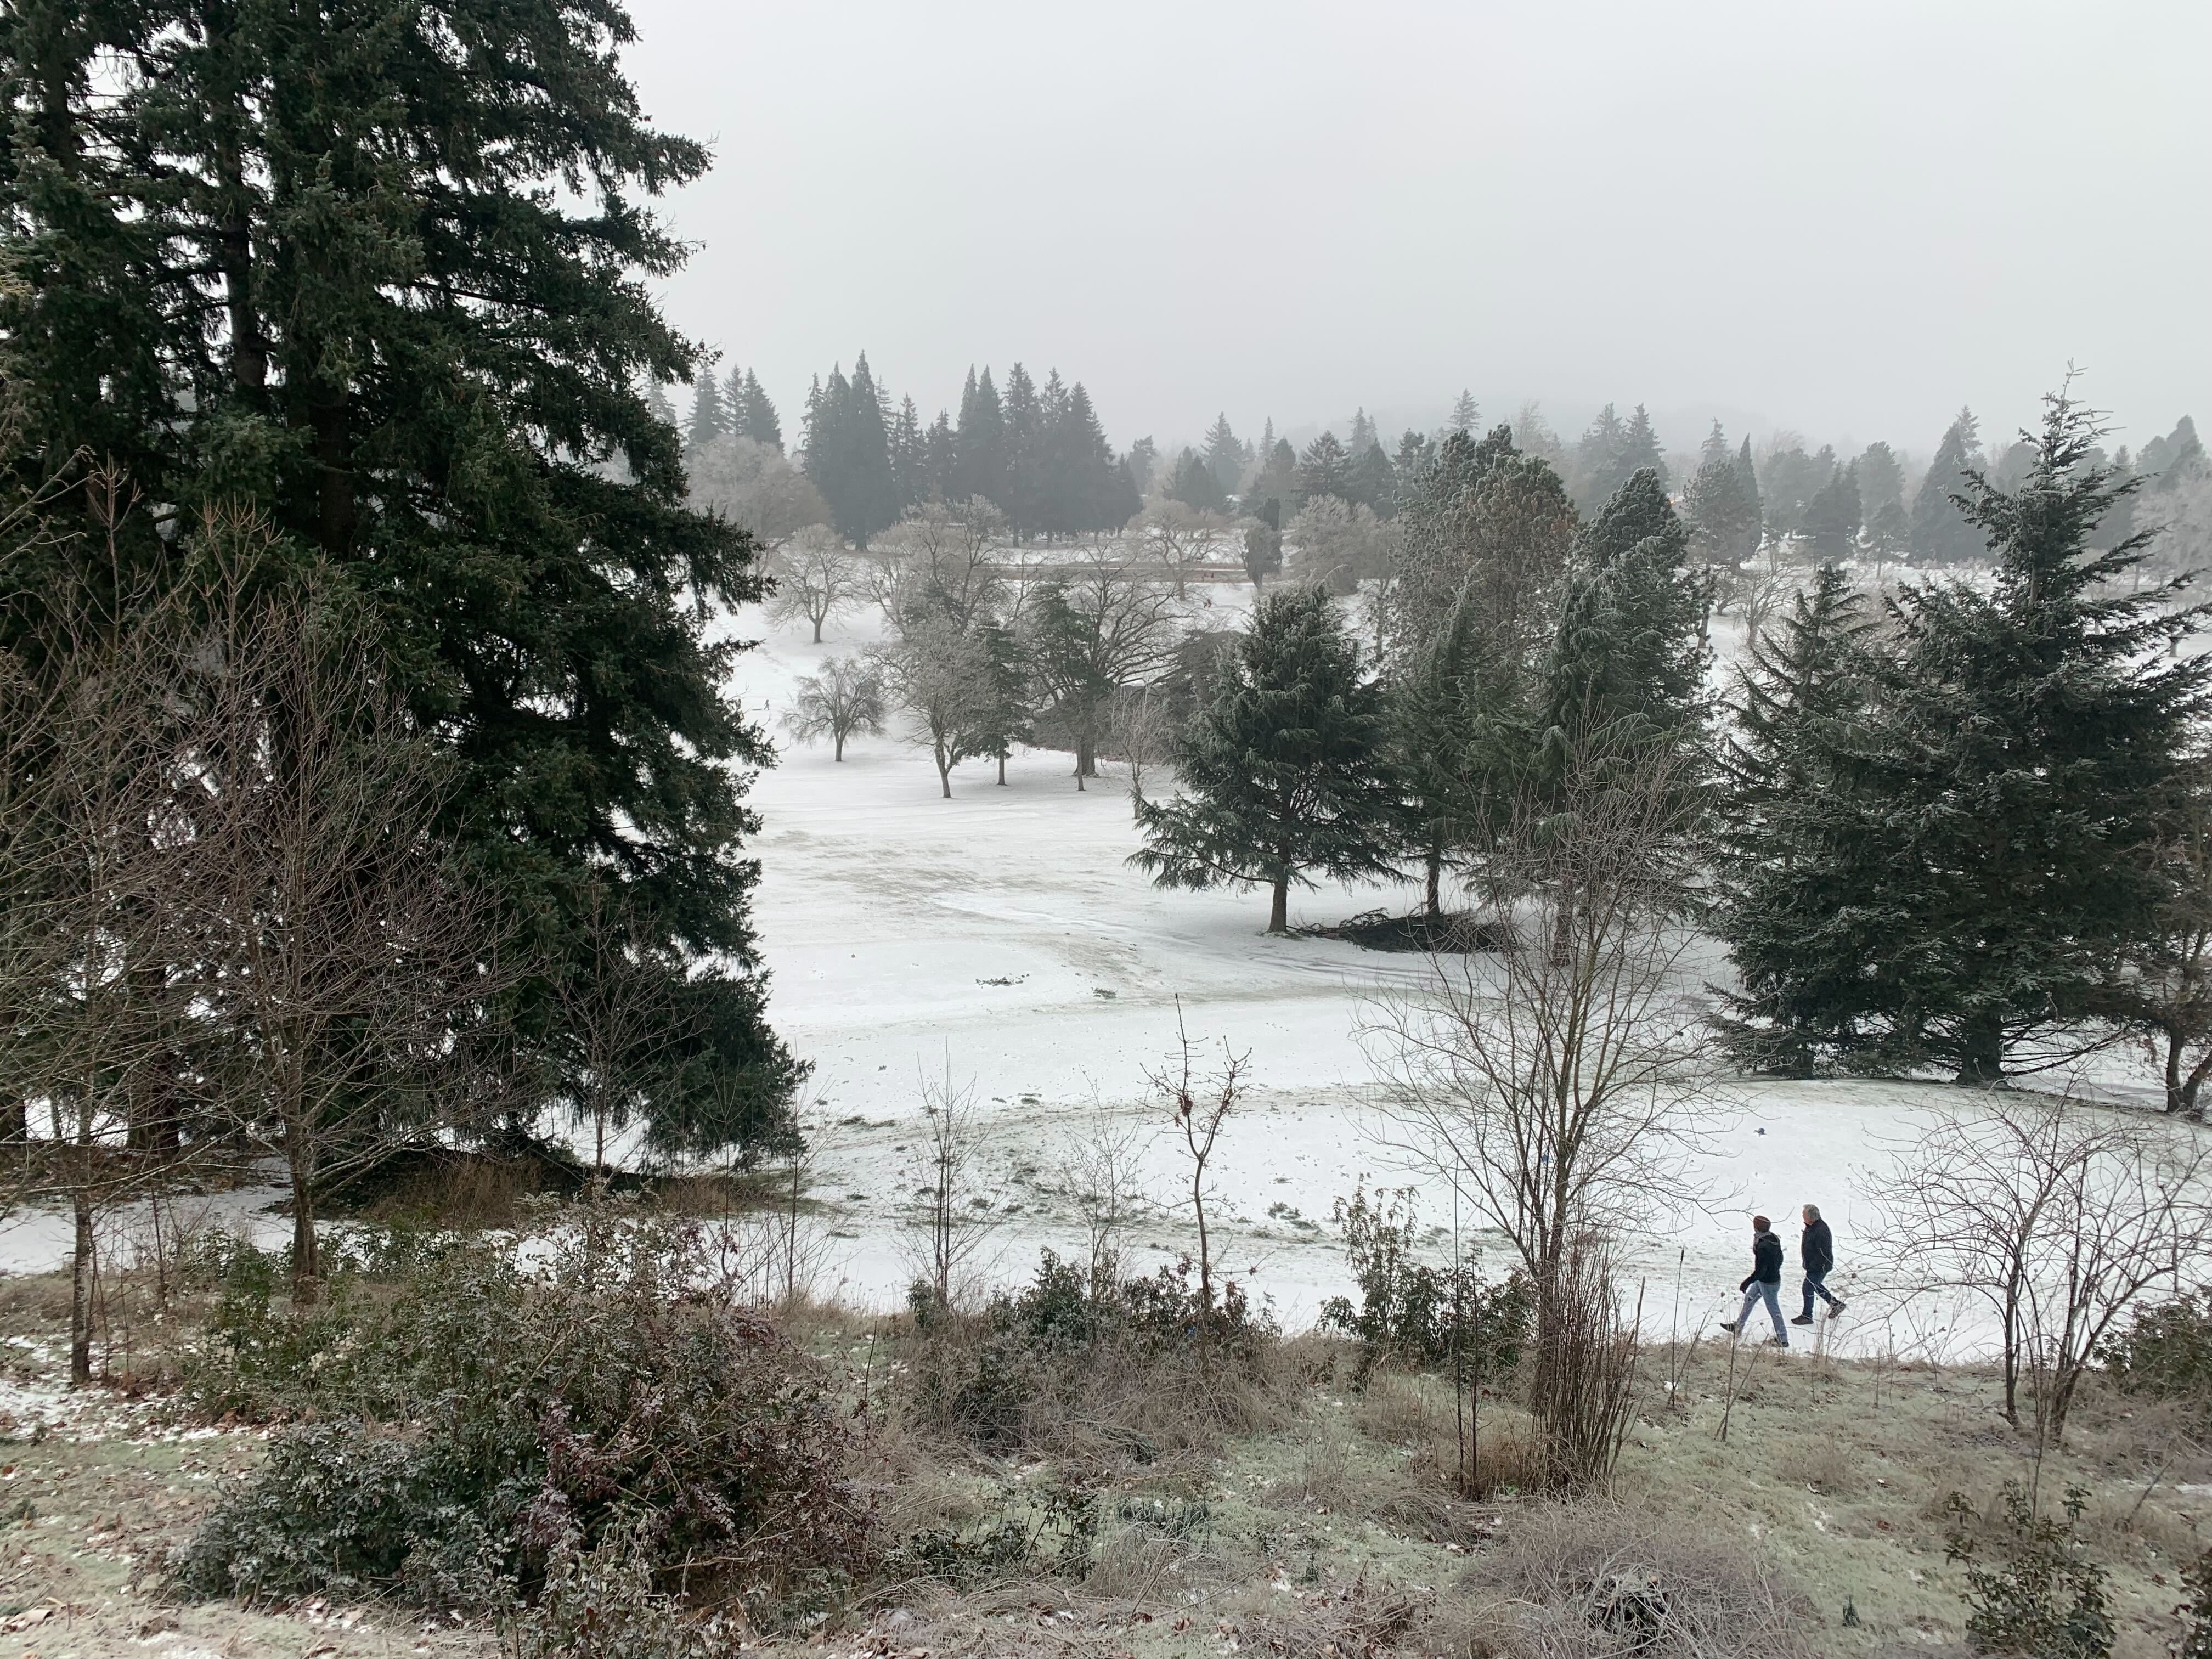 City of Portland unsuccessfully pitches Rose City Golf Course as MLB stadium site